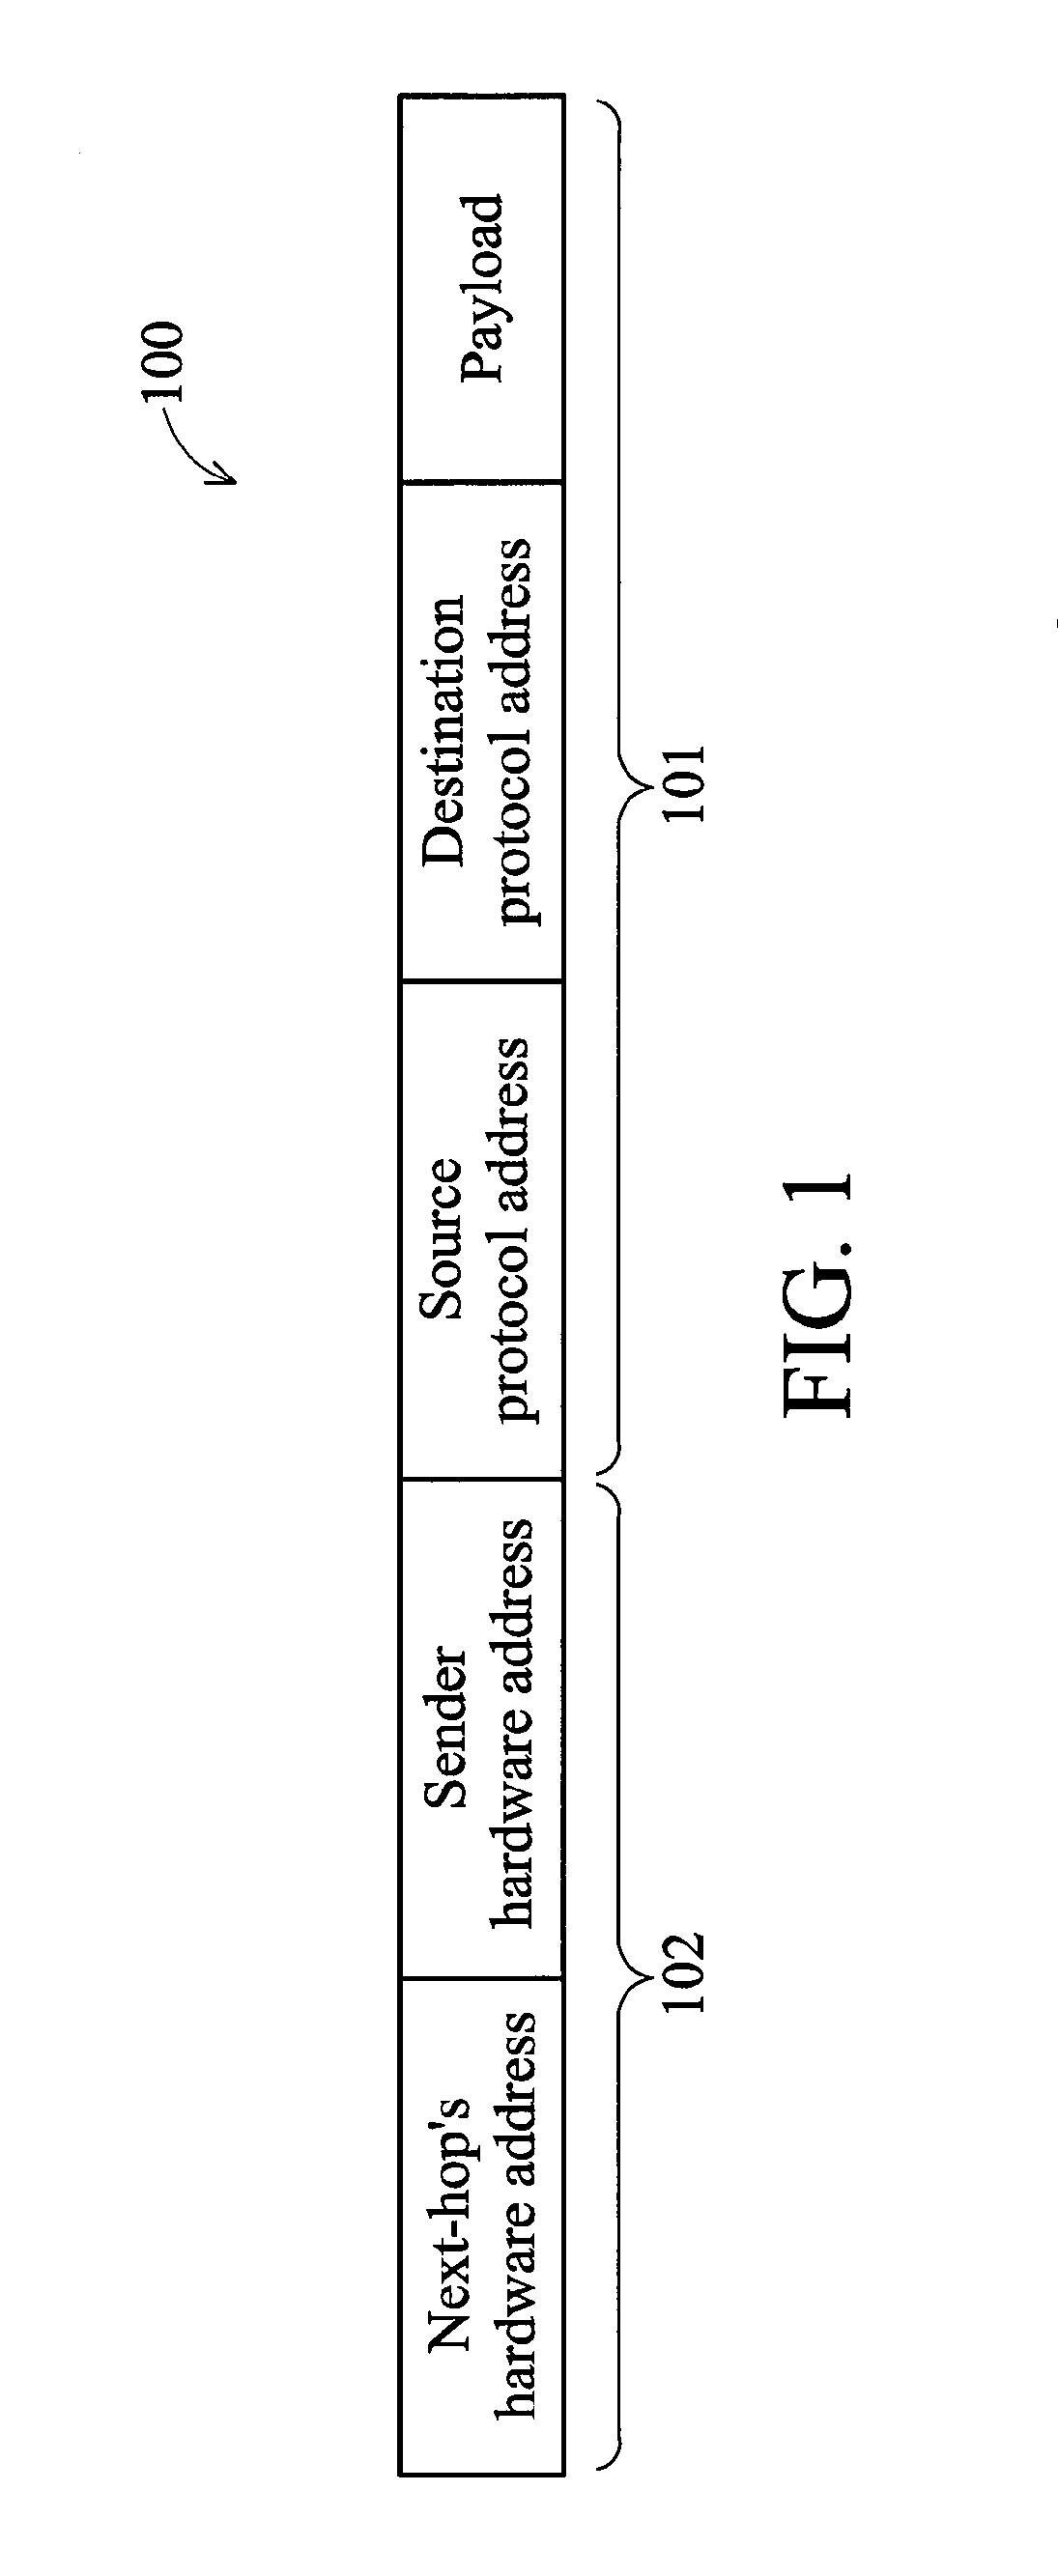 Address resolution protocol (ARP) cache management methods and devices